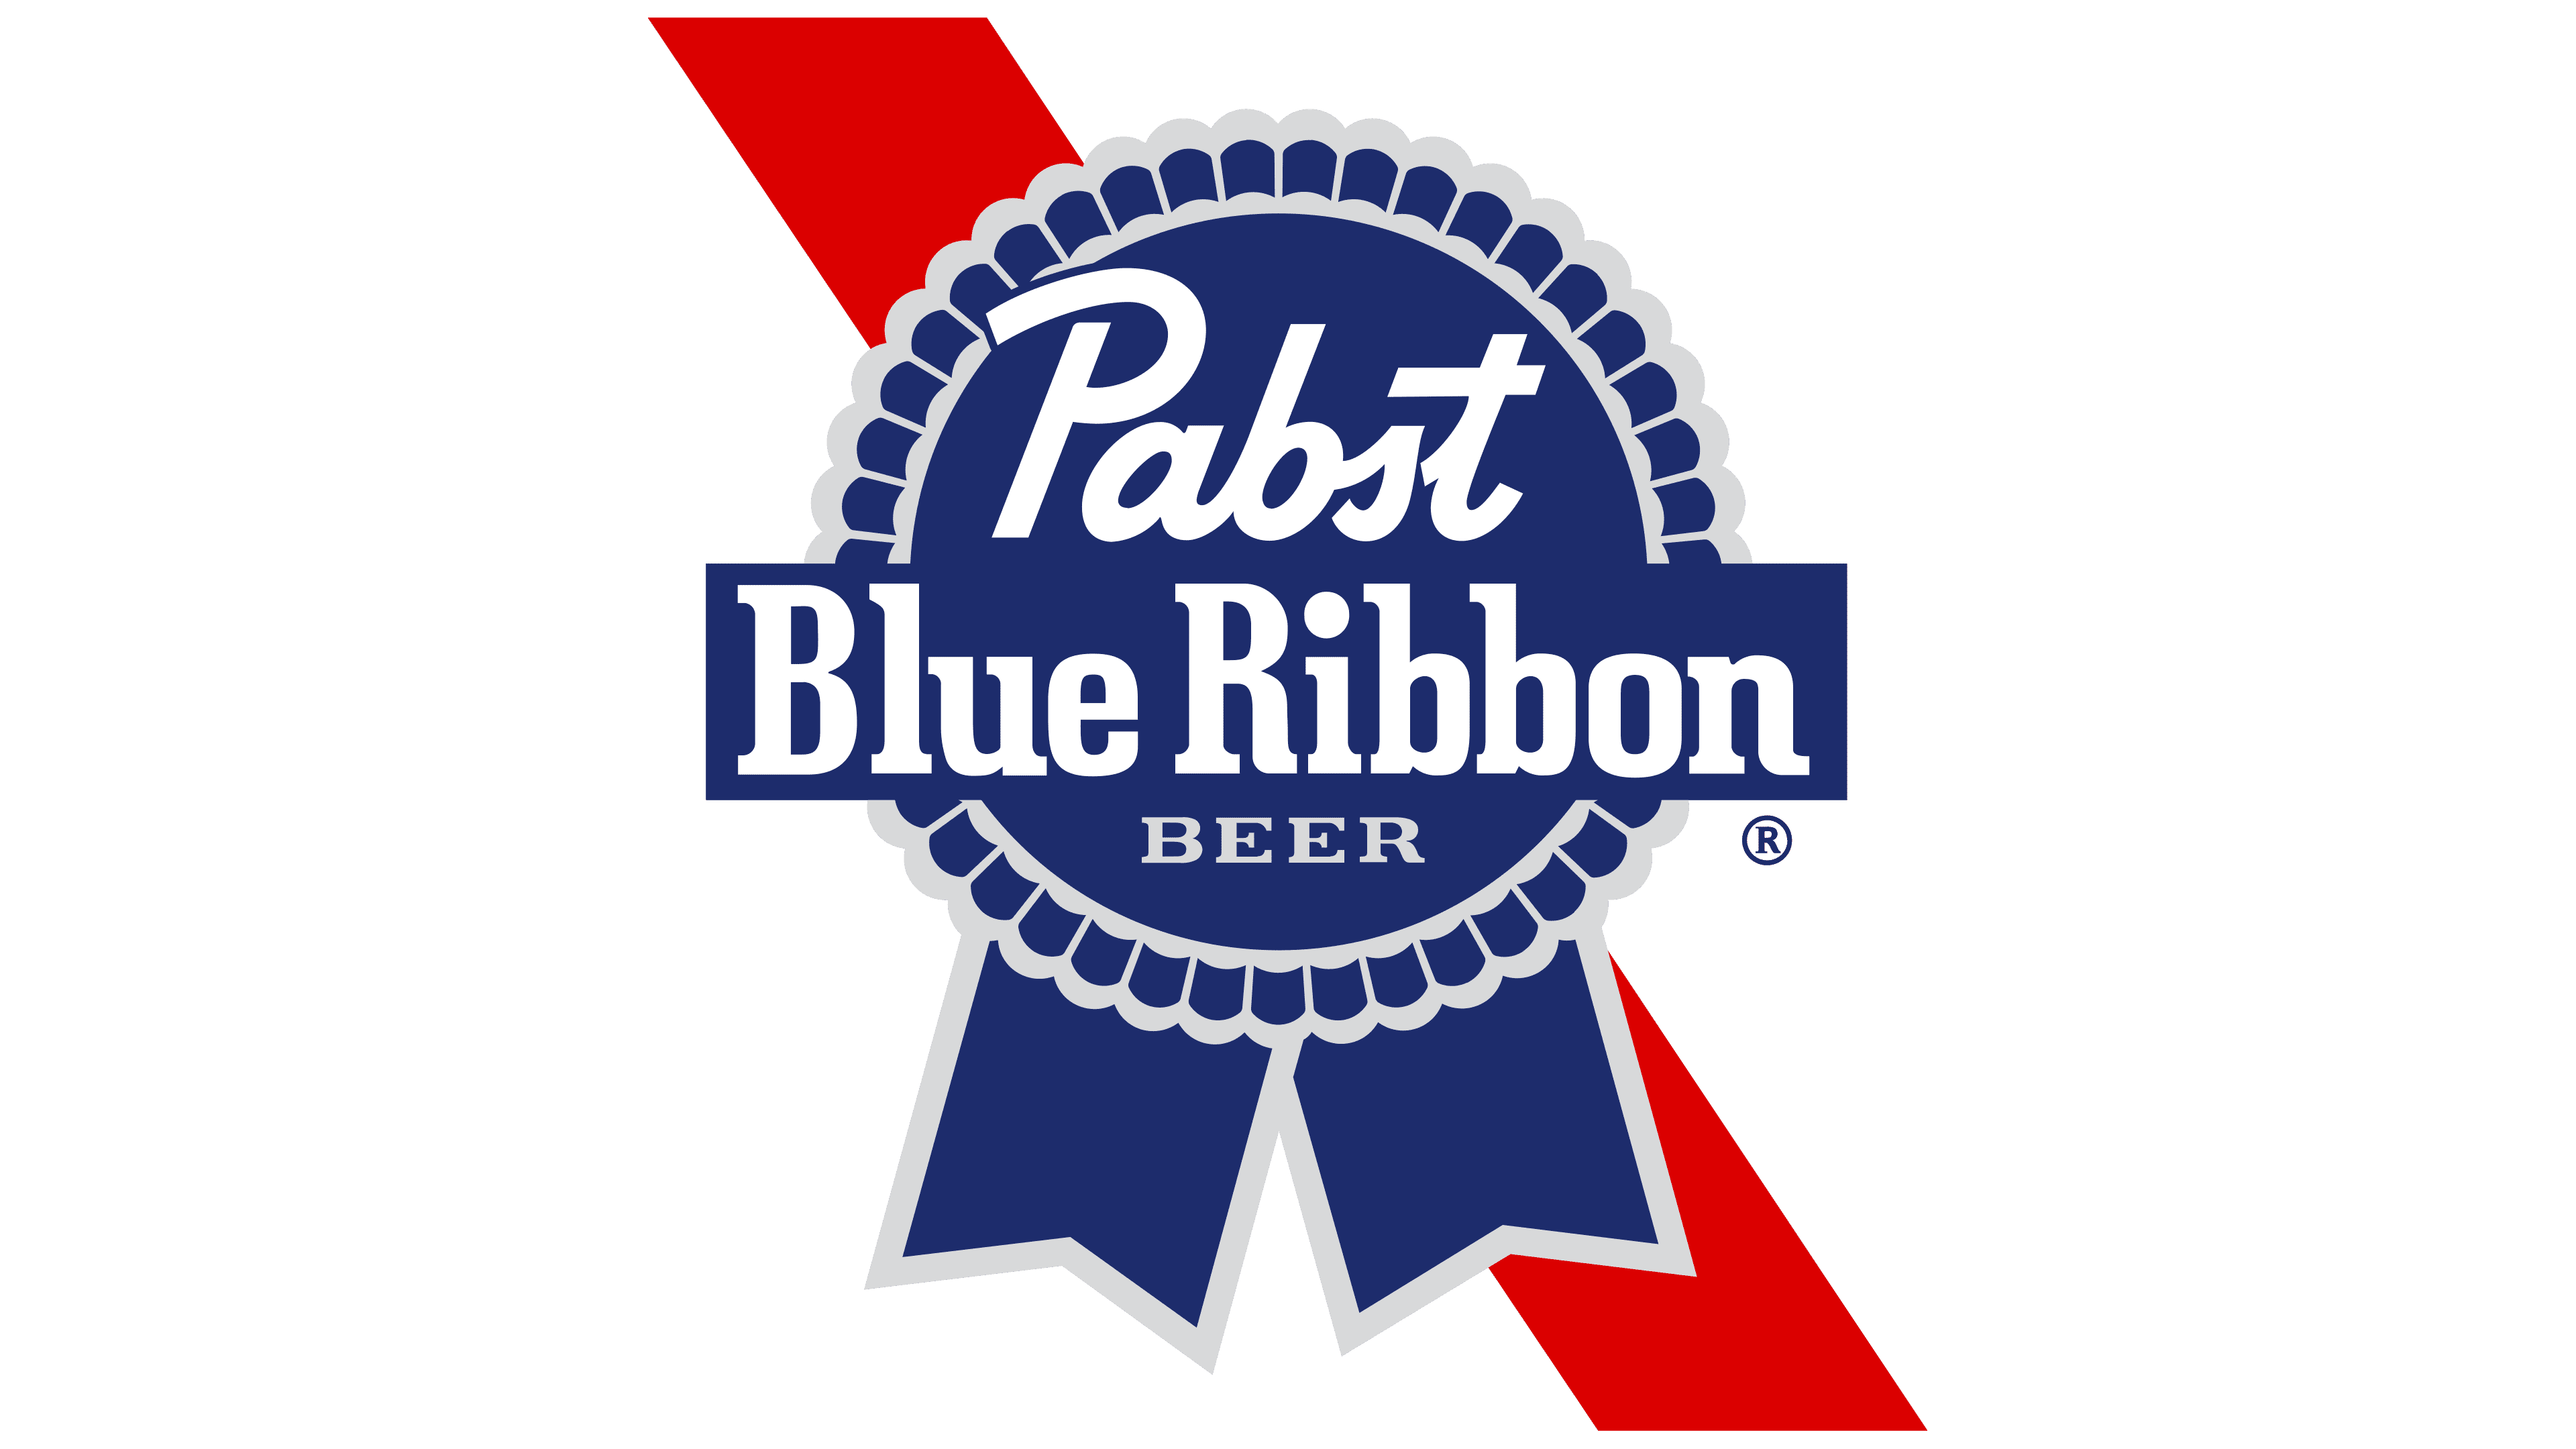 Pbr Pabst Blue Ribbon Logo Symbol Meaning History Png Brand